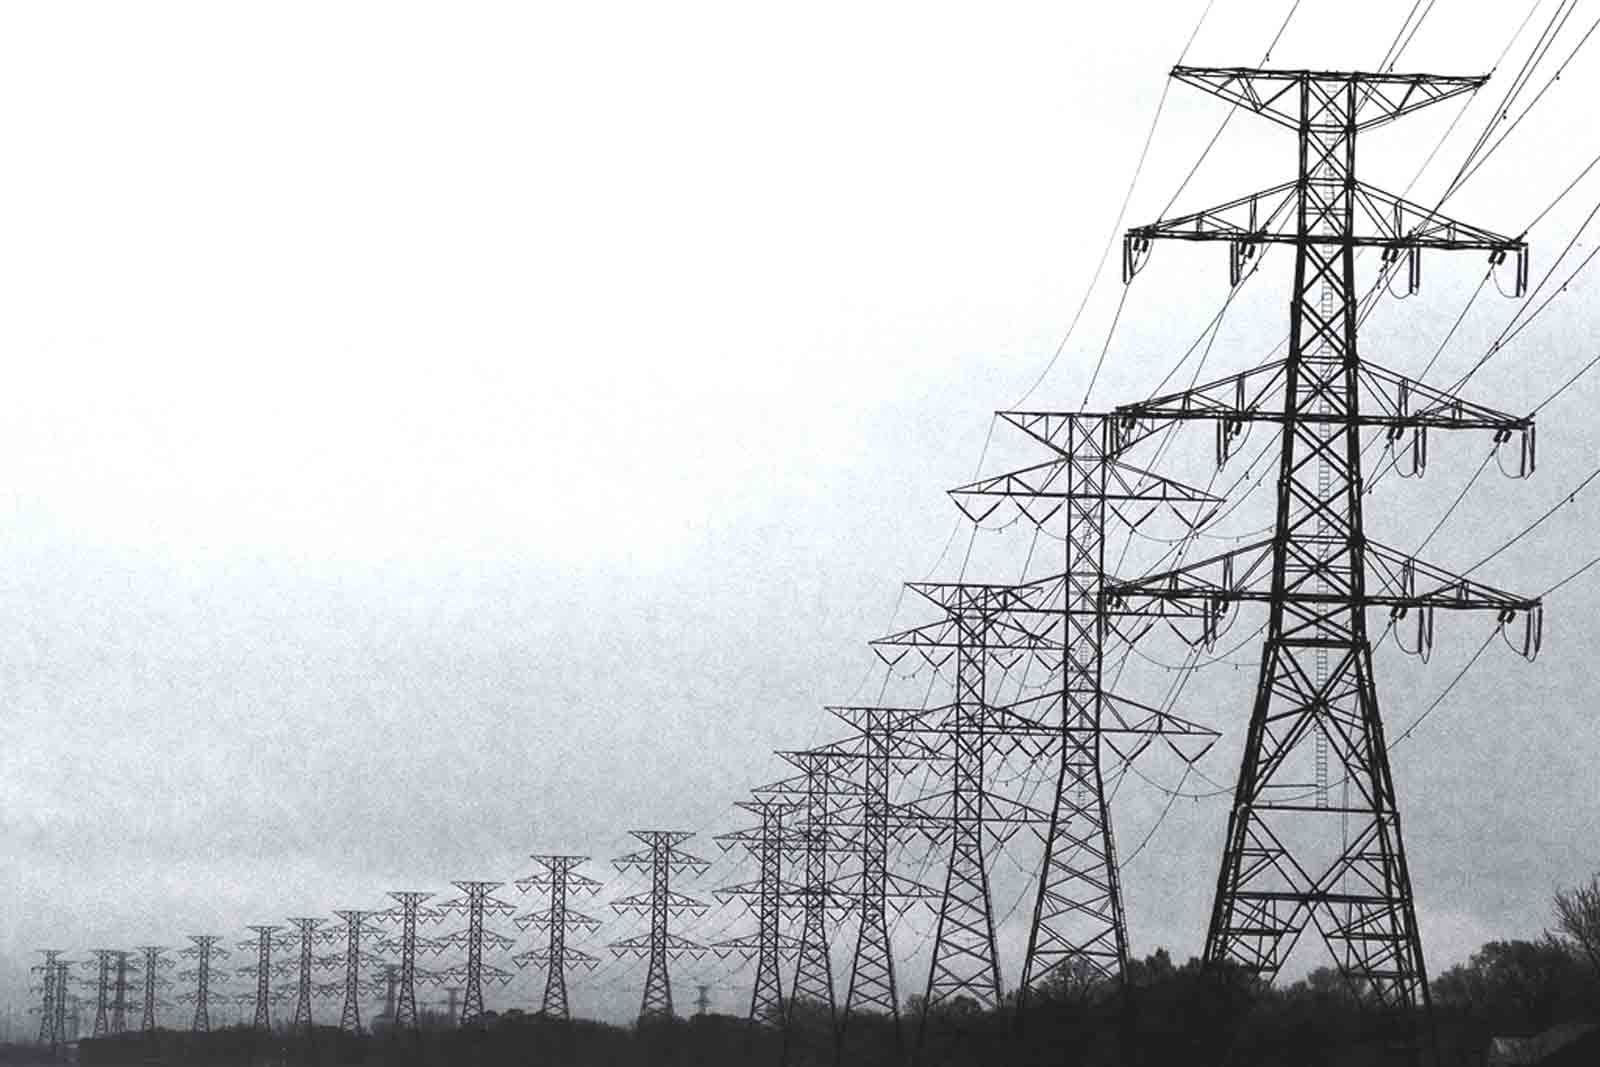 BS Ltd declares L1 (lowest) bidder in JV for power projects